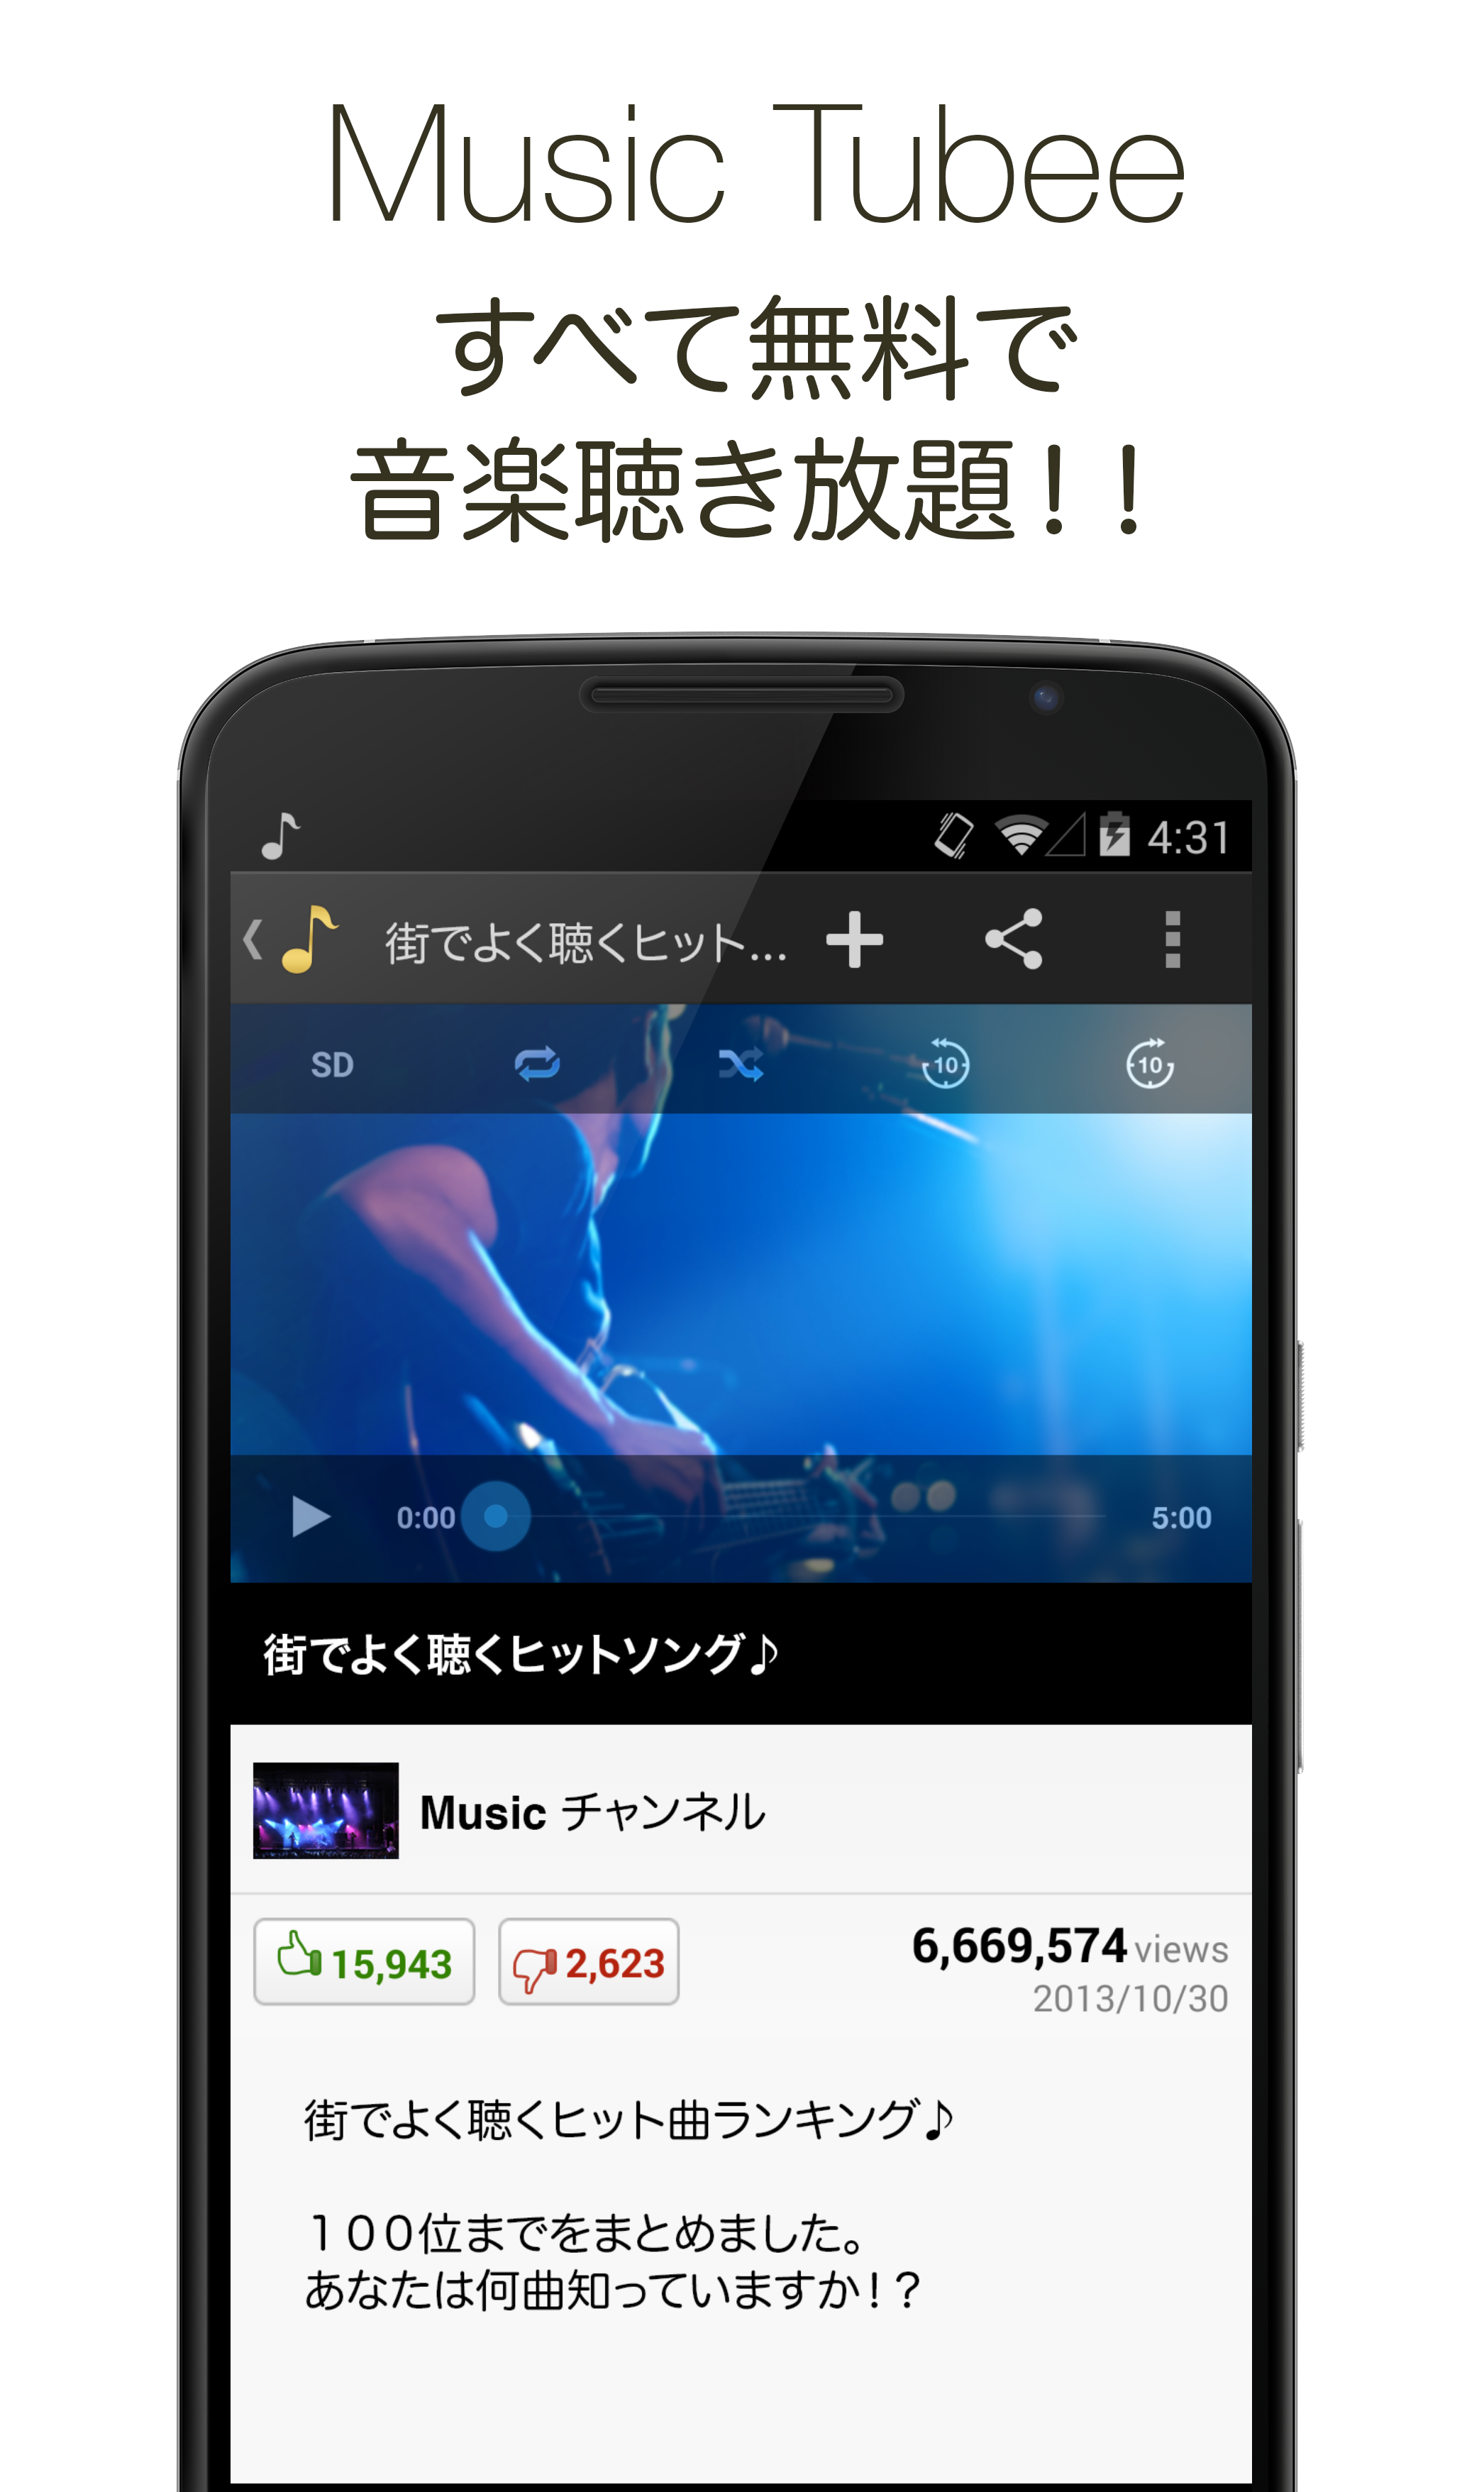 Android application 音楽聴き放題 Music Tubee for YouTube screenshort